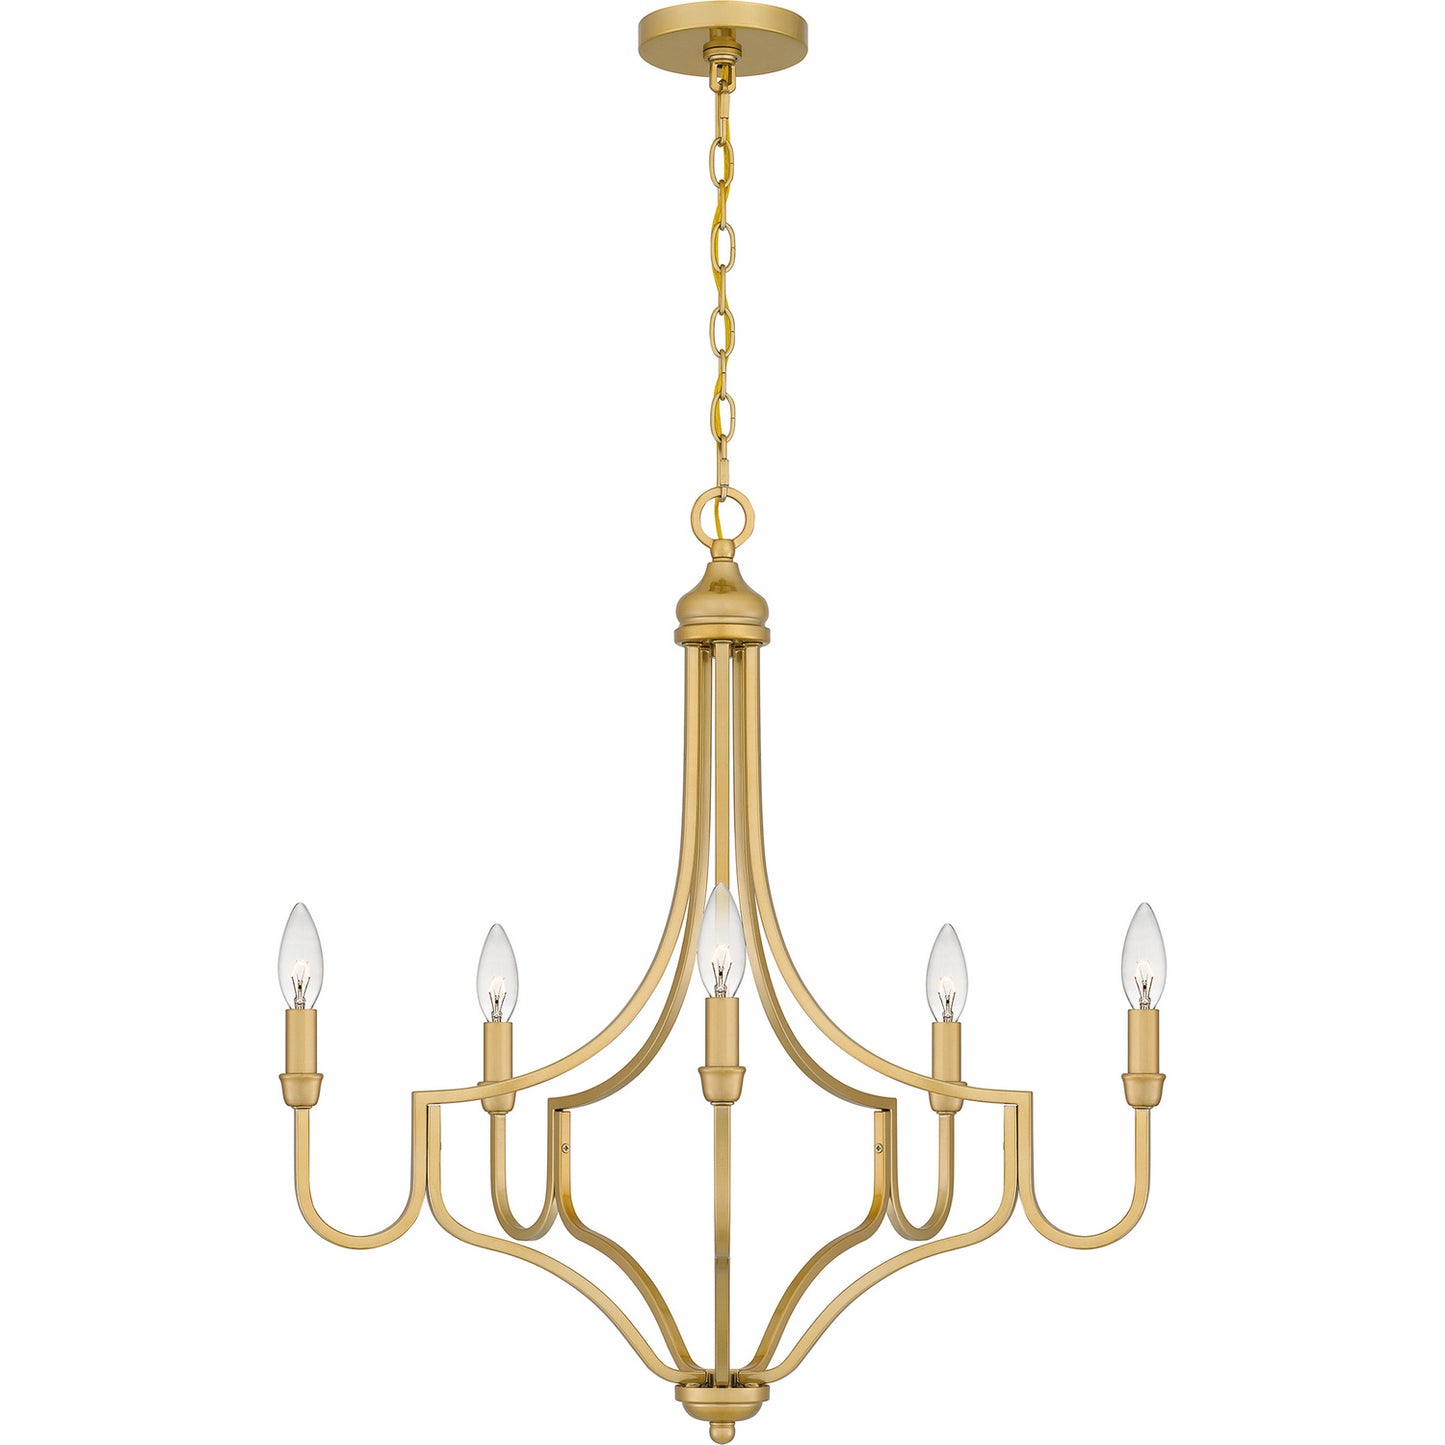 Mabel Five Light Chandelier by Quoizel in Light Gold Finish (MAB5026LG)